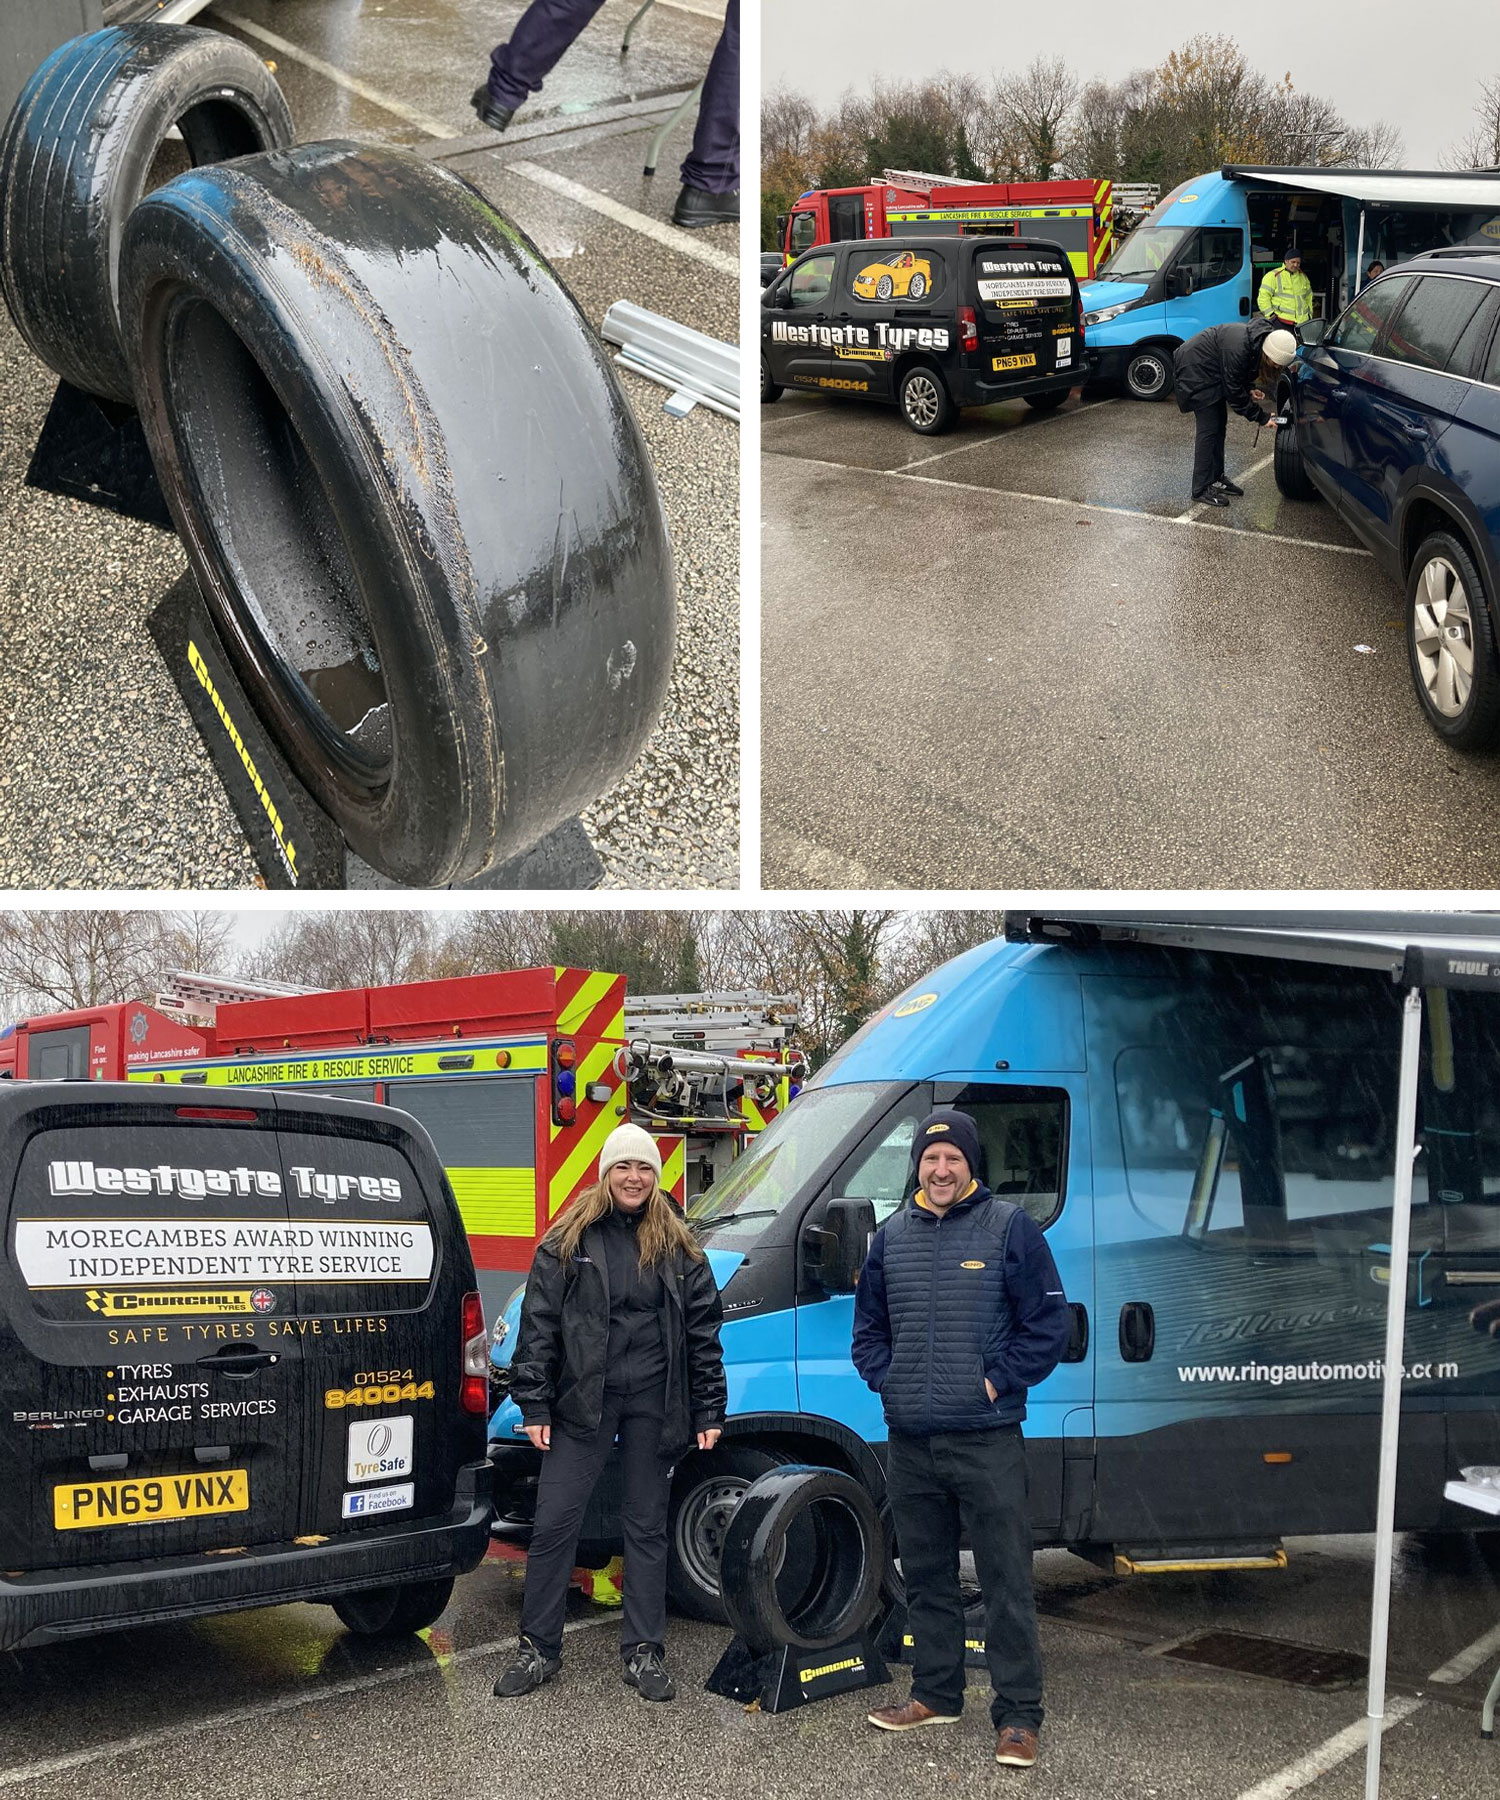 Ring Automotive visits Lancaster to promote Tyre Safety